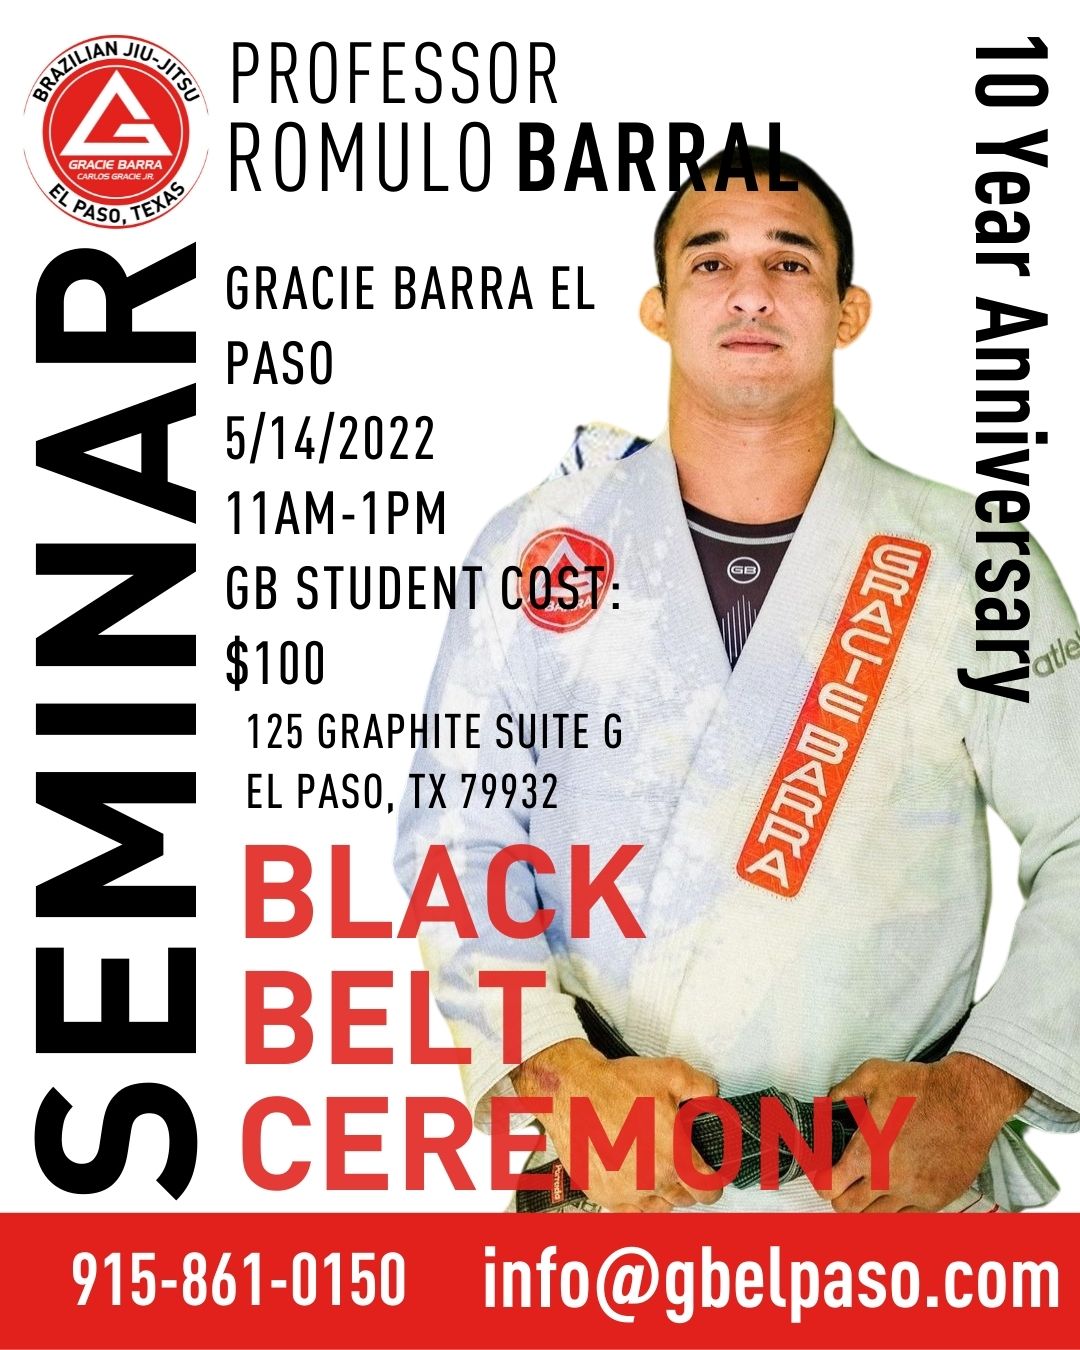 Get Ready for The Romulo Barral Seminar on 5.14.22!